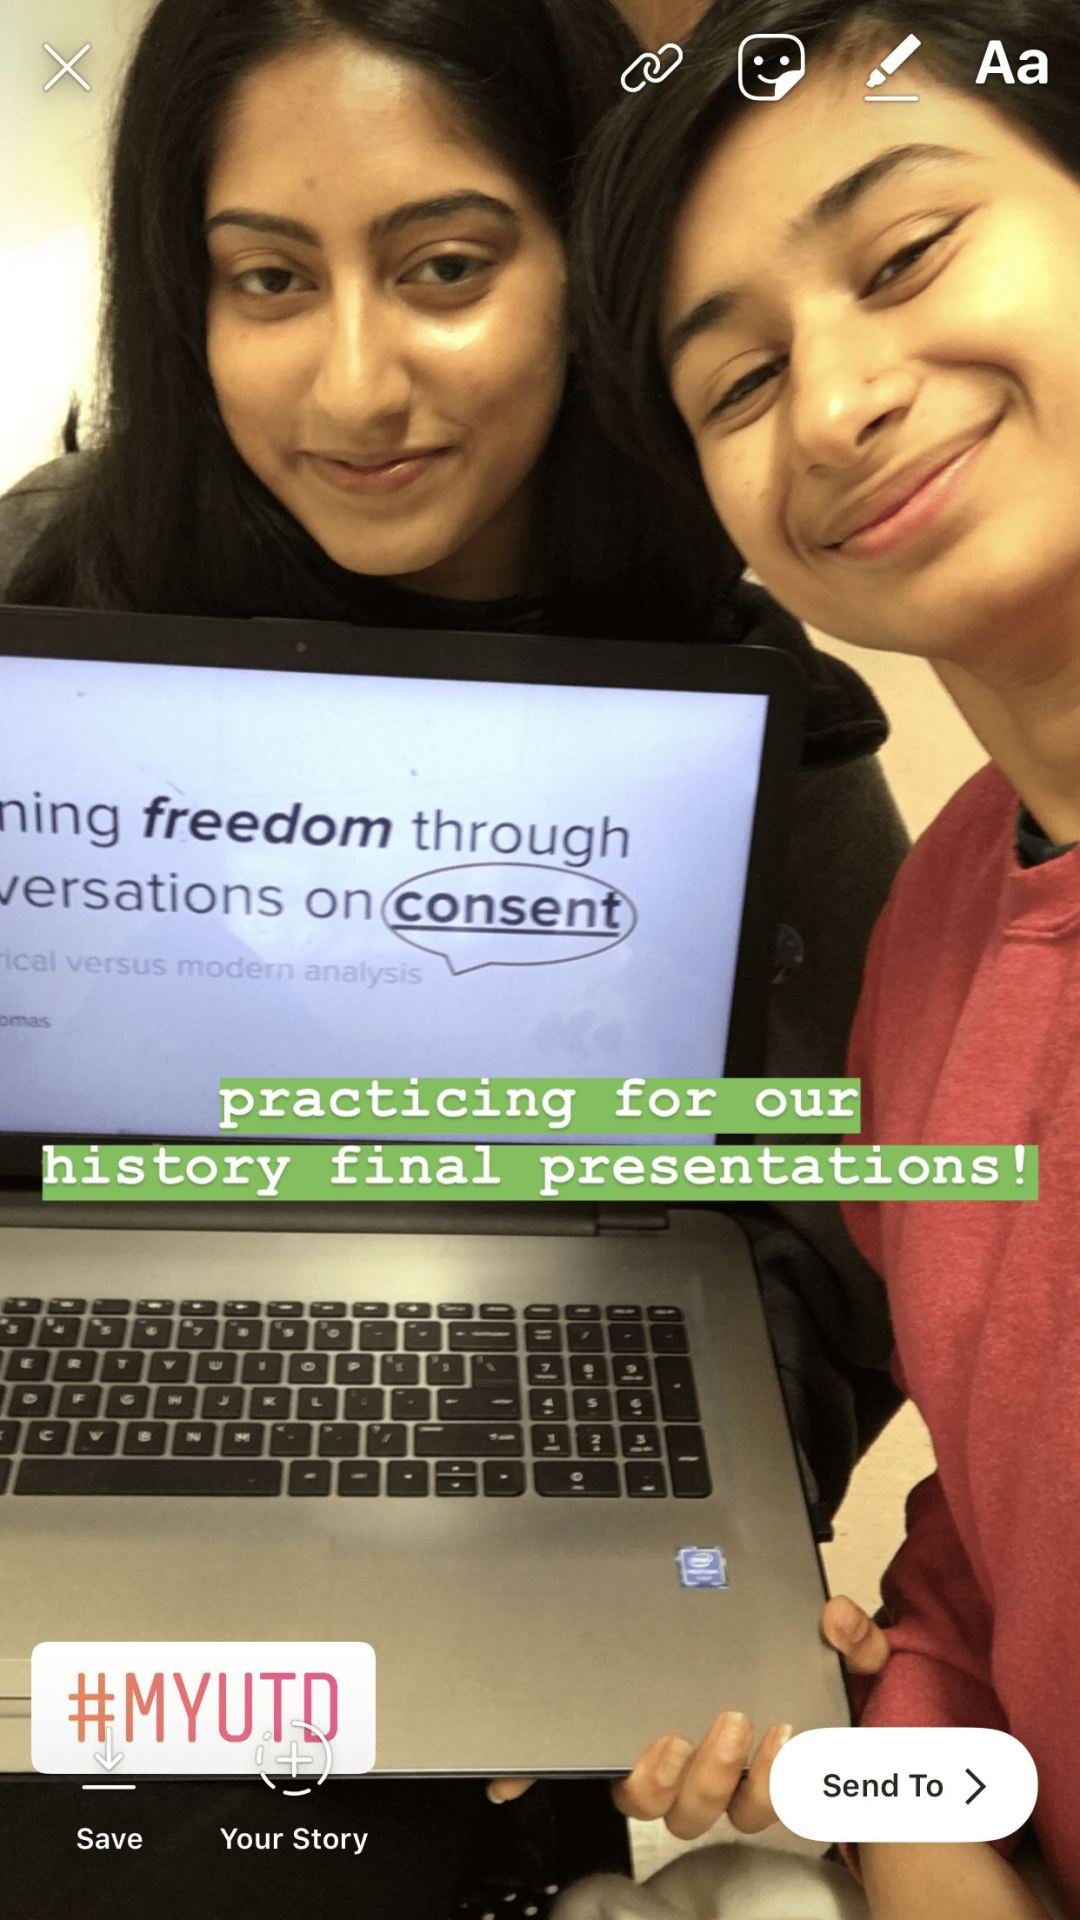 Ragya and another person take a selfie together. They're holding a laptop; part of the screen is visible with the words, freedom through conversations on consent.